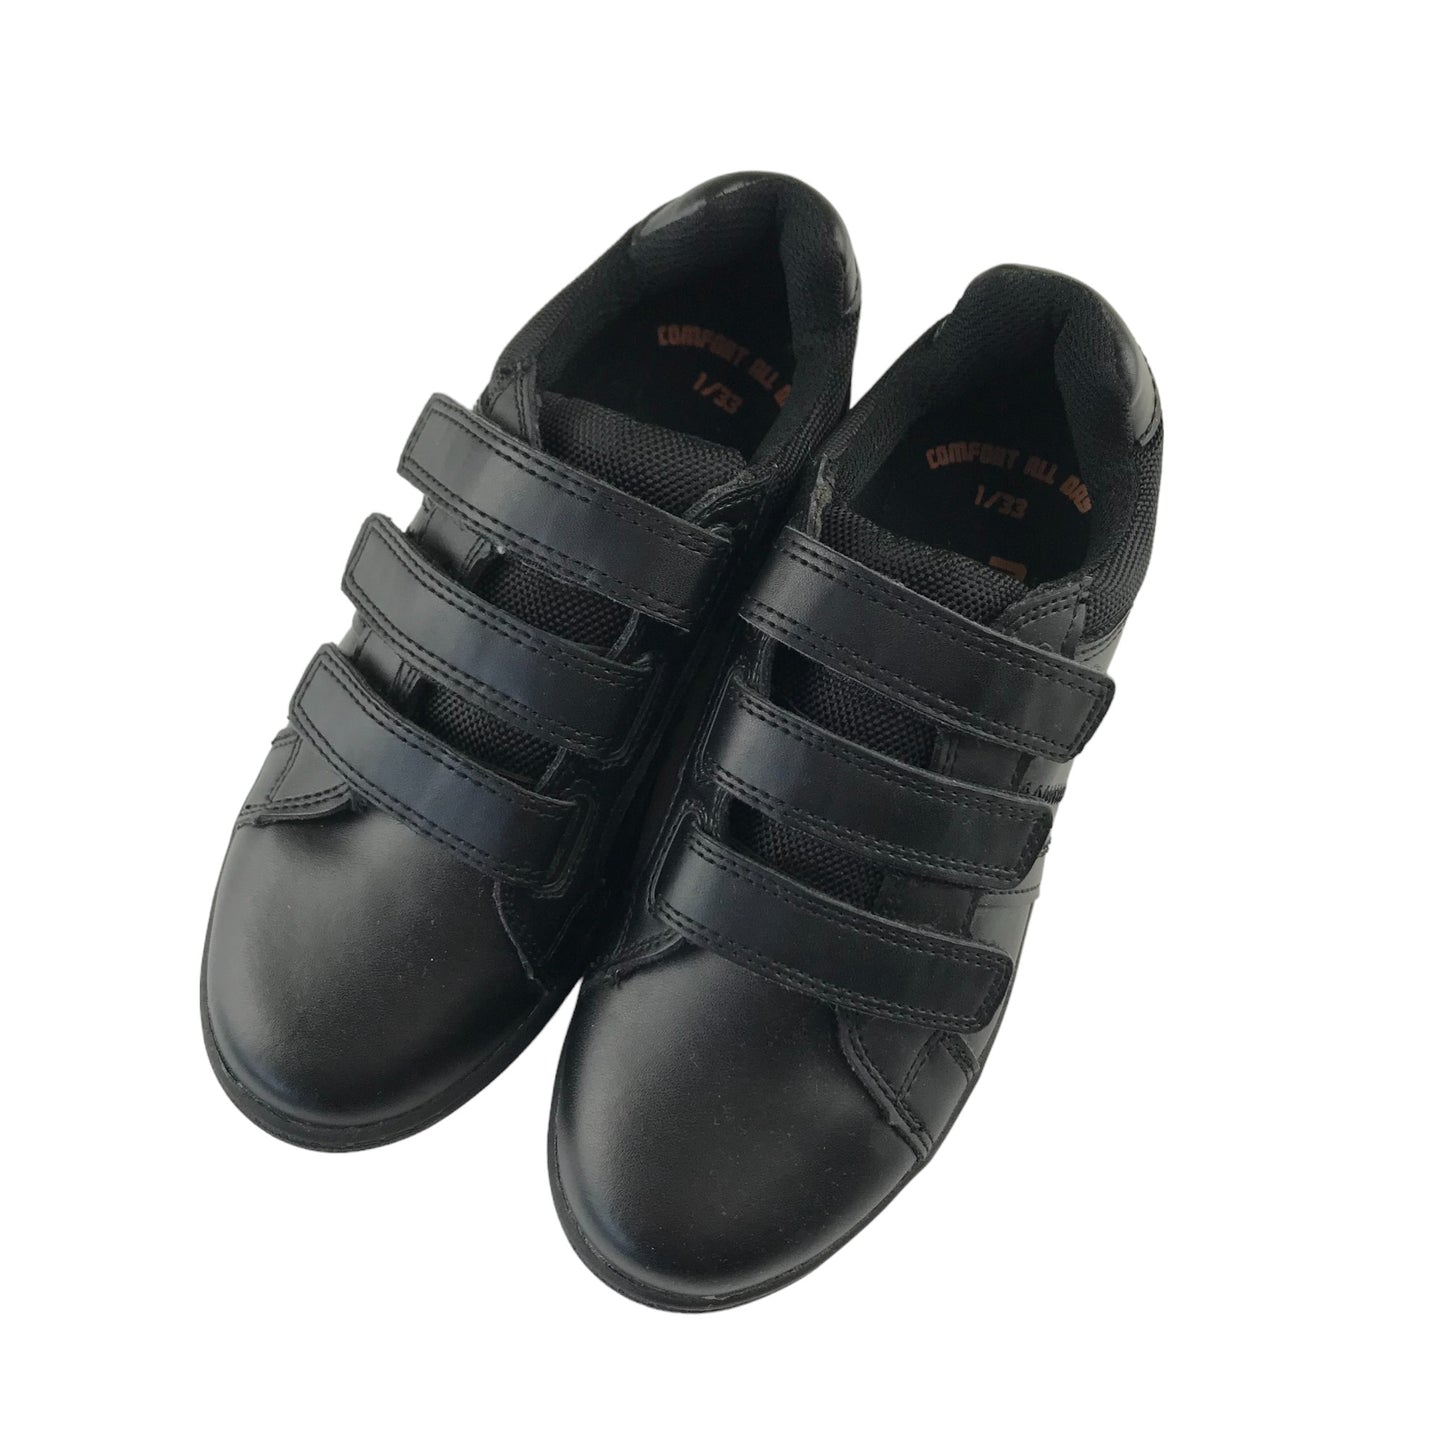 George Trainers Shoe Size 1 Black Leather-style School Shoes with Straps